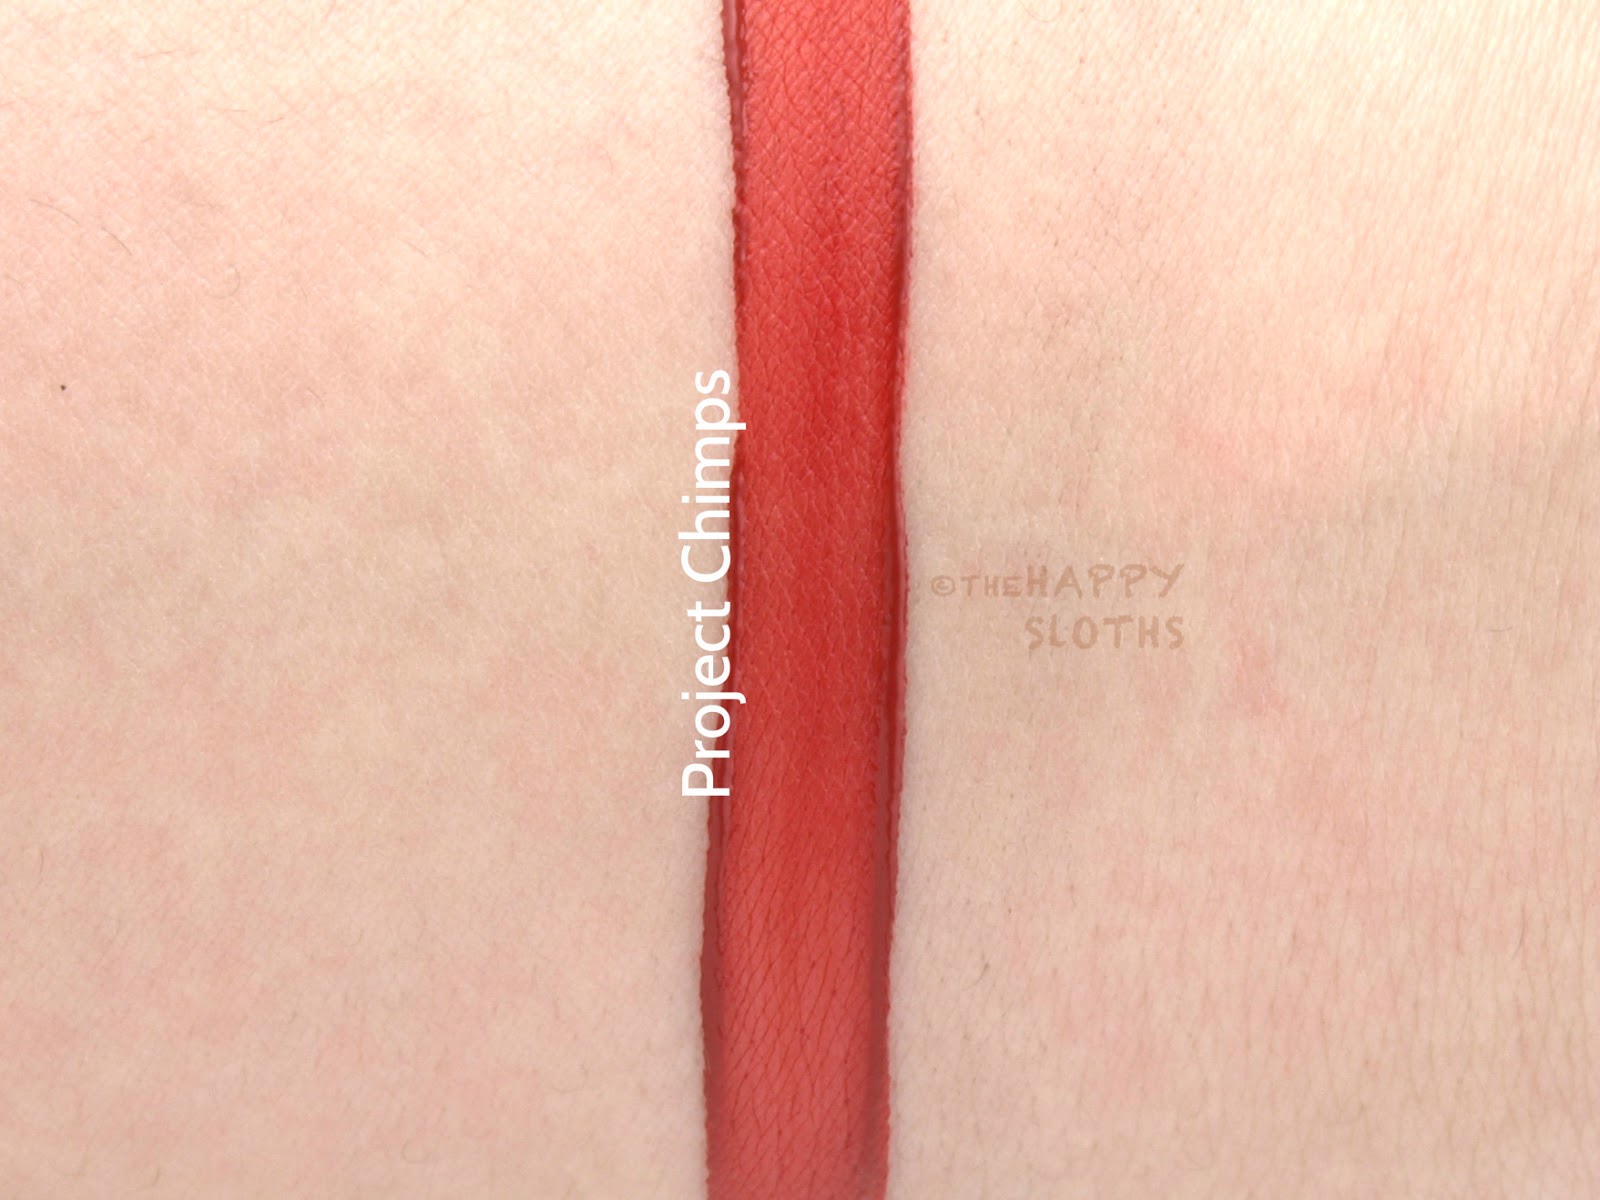 Kat Von D Everlasting Liquid Lipstick in Chimps": Review and Swatches | The Happy Sloths: Beauty, Skincare with Reviews and Swatches